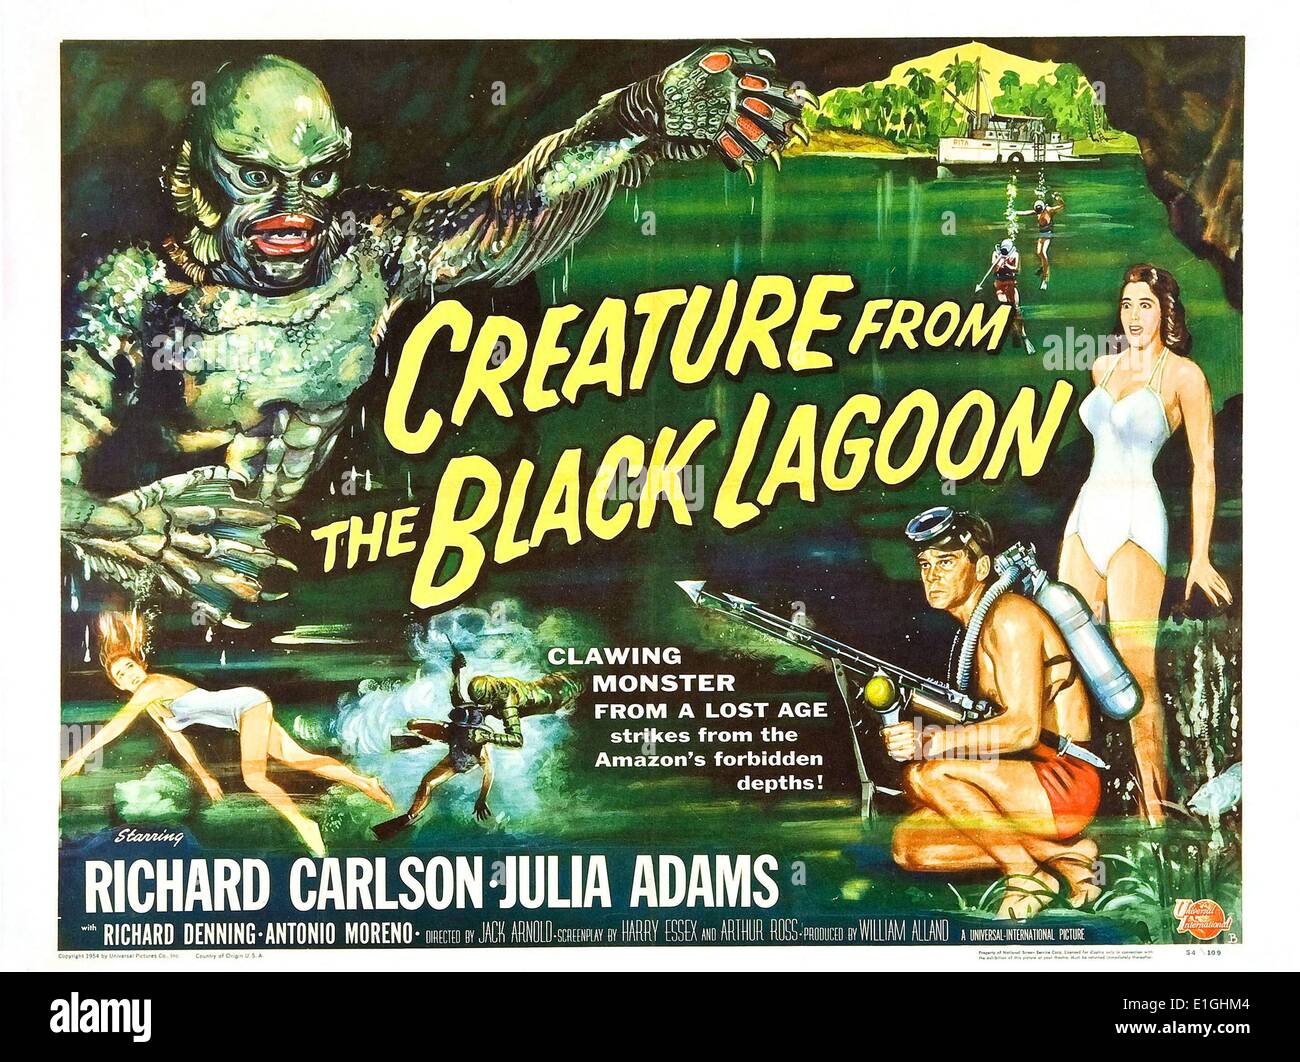 Creature from the Black Lagoon a 1954 monster horror 3-D film in black and white starring Richard Carlson and Julia Adams. Stock Photo